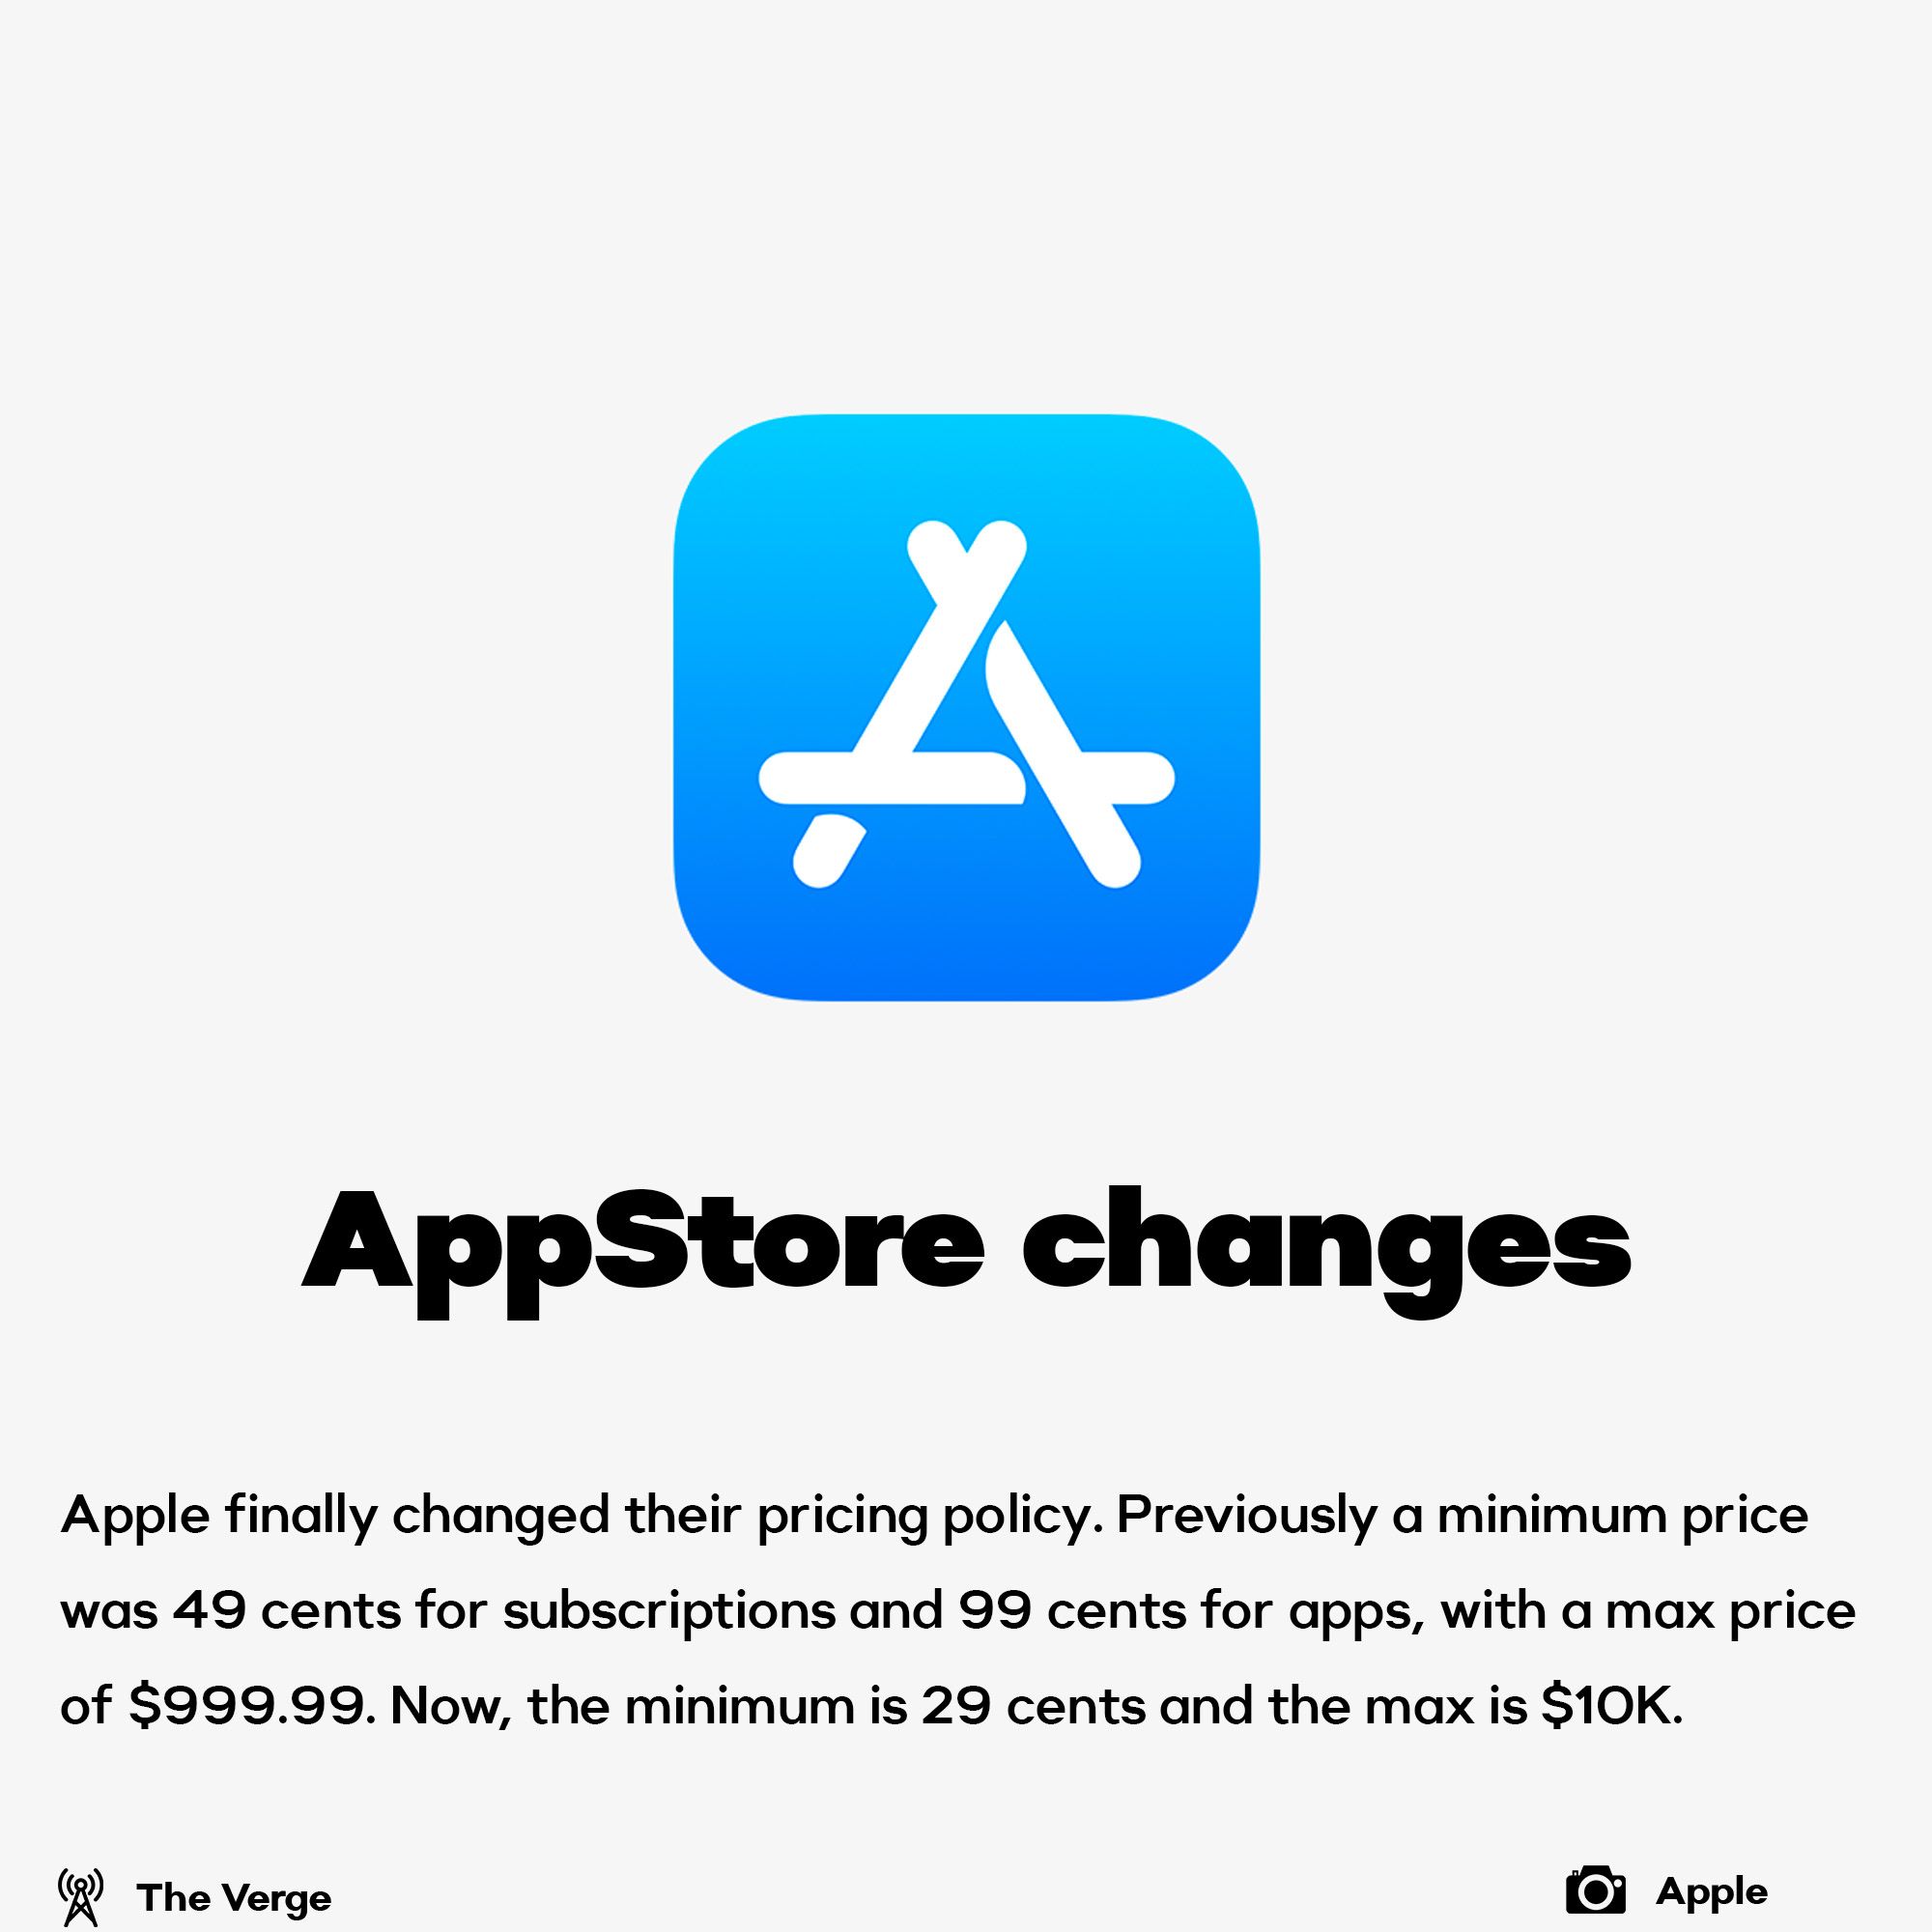 AppStore prices